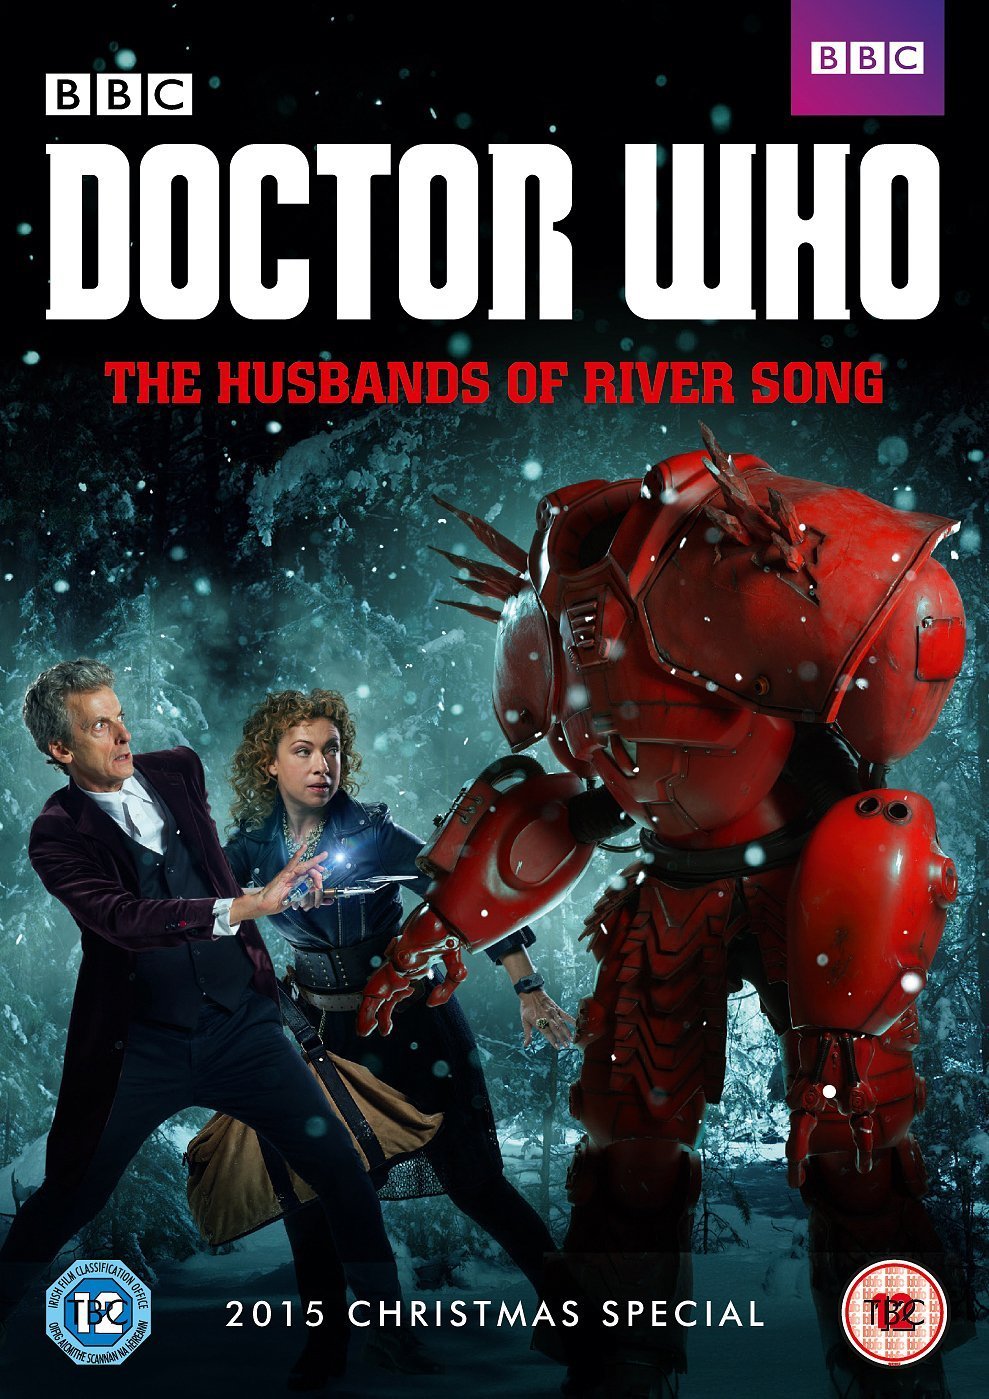 Poster of the movie Doctor Who: The Husbands of River Song